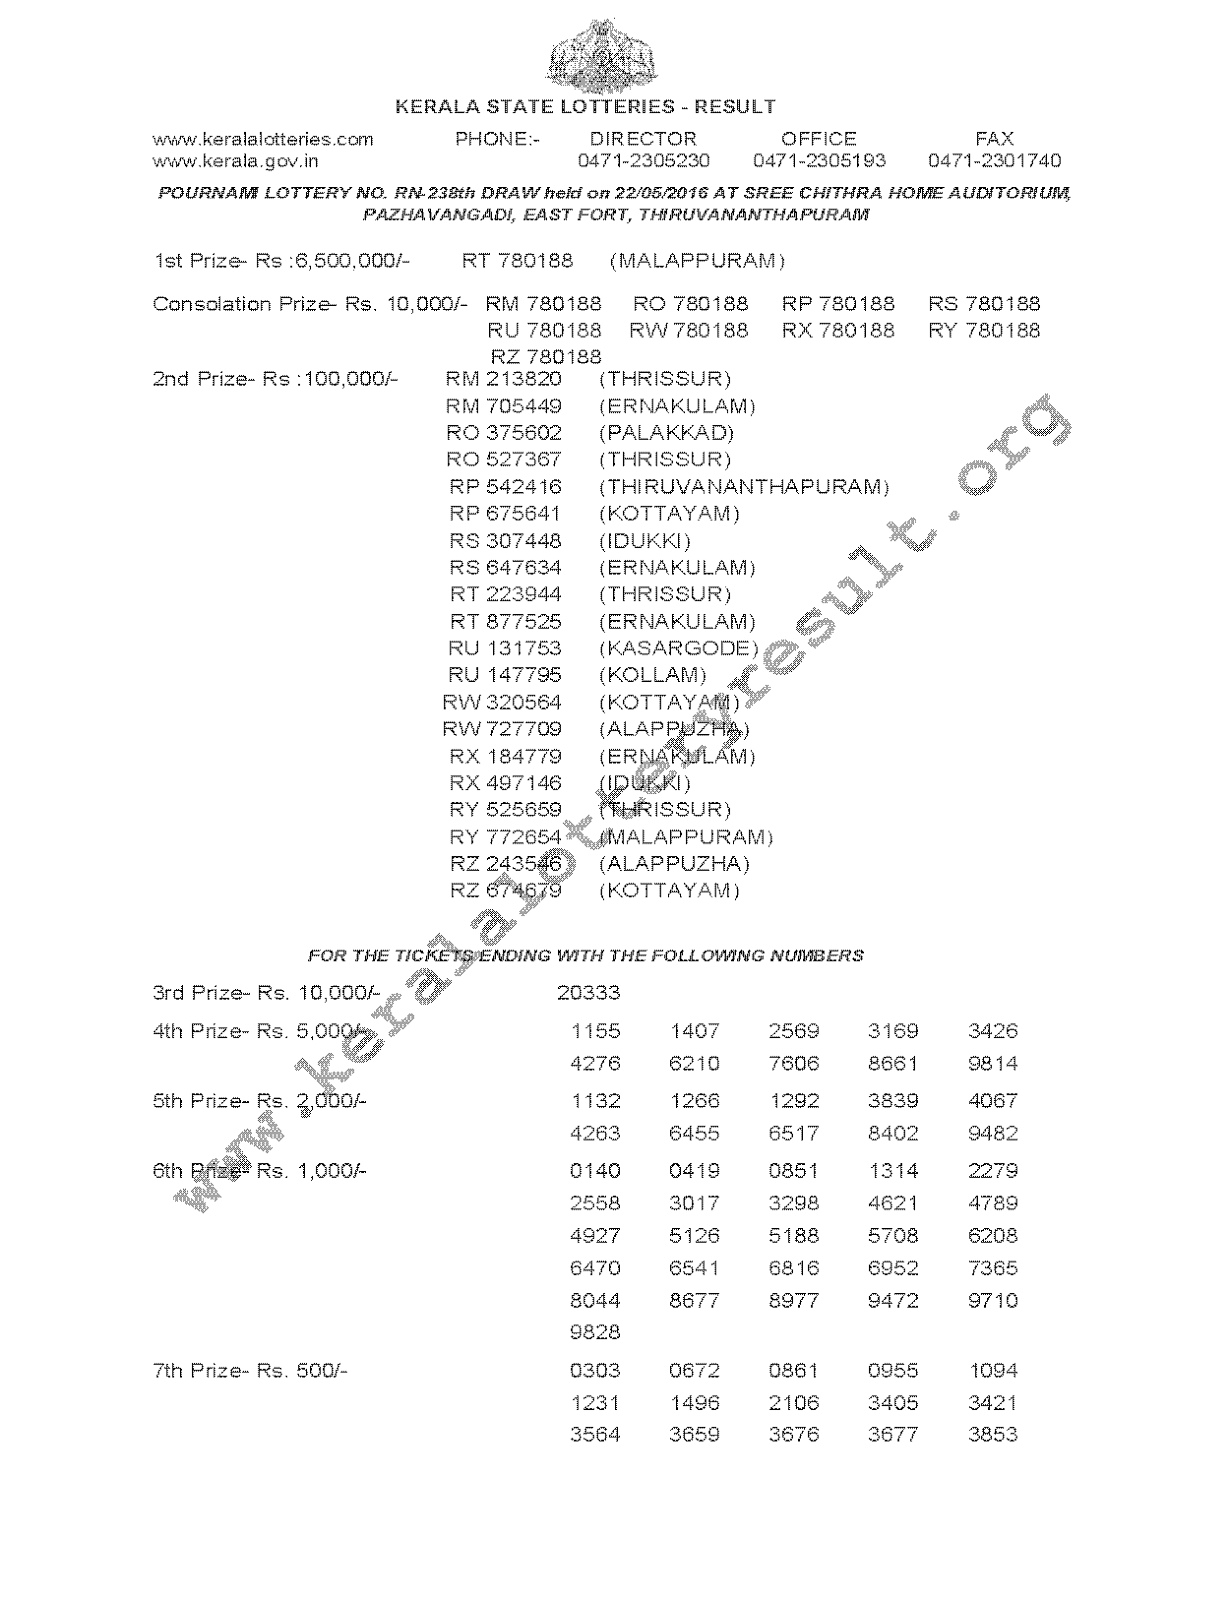 POURNAMI Lottery RN 238 Result 22-5-2016